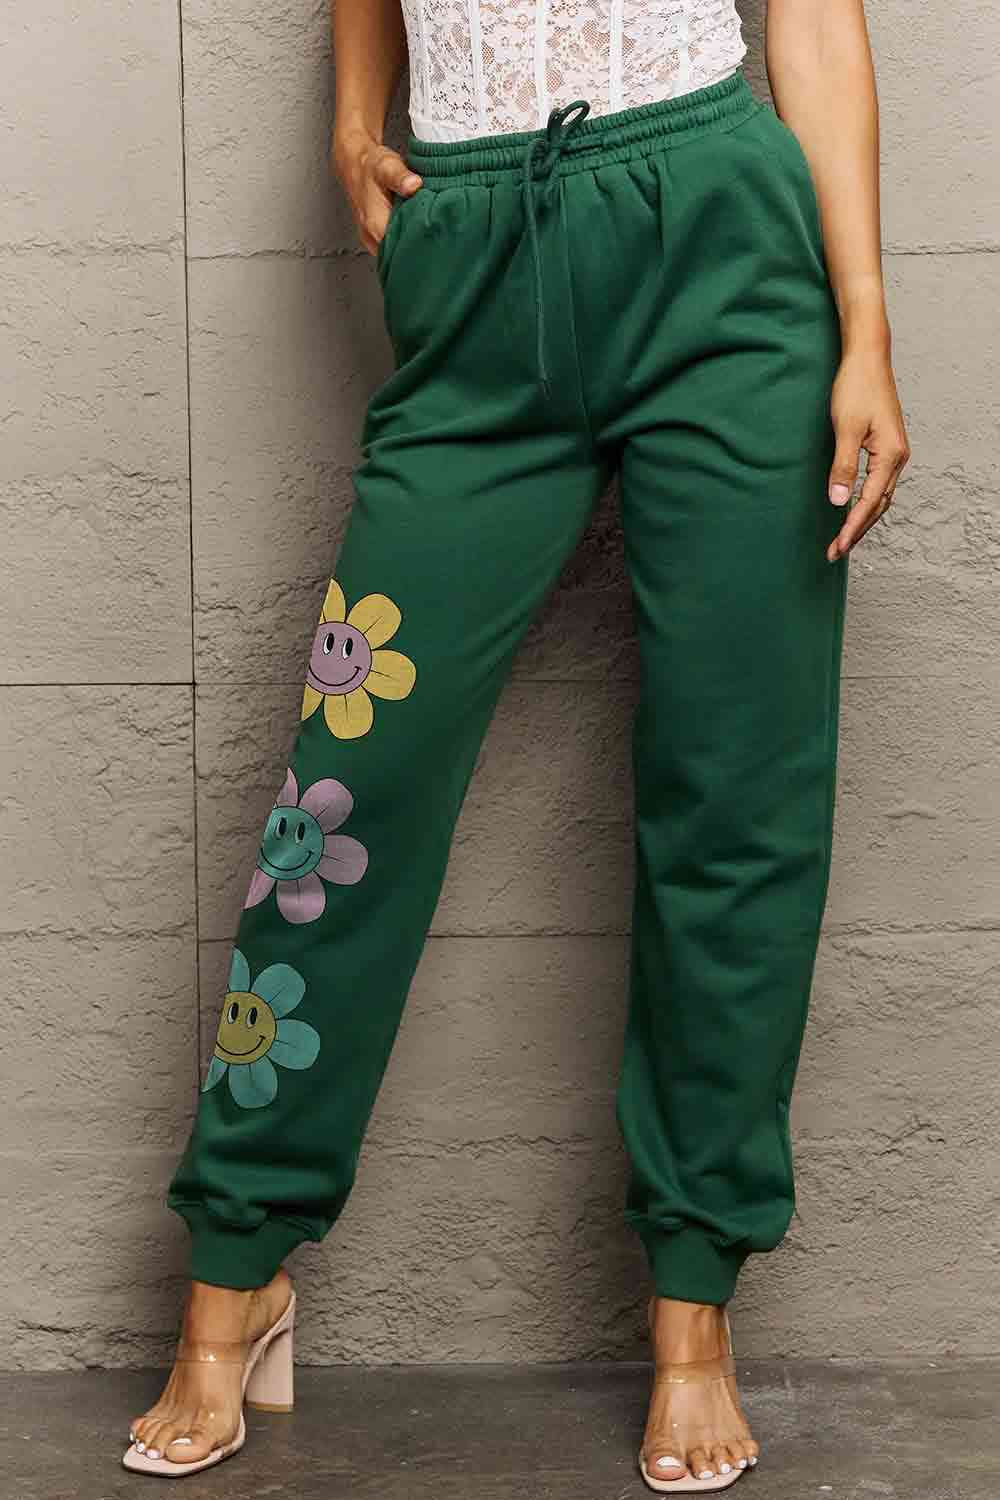 Simply Love Simply Love Full Size Drawstring Flower Graphic Long Sweatpants - GemThreads Boutique